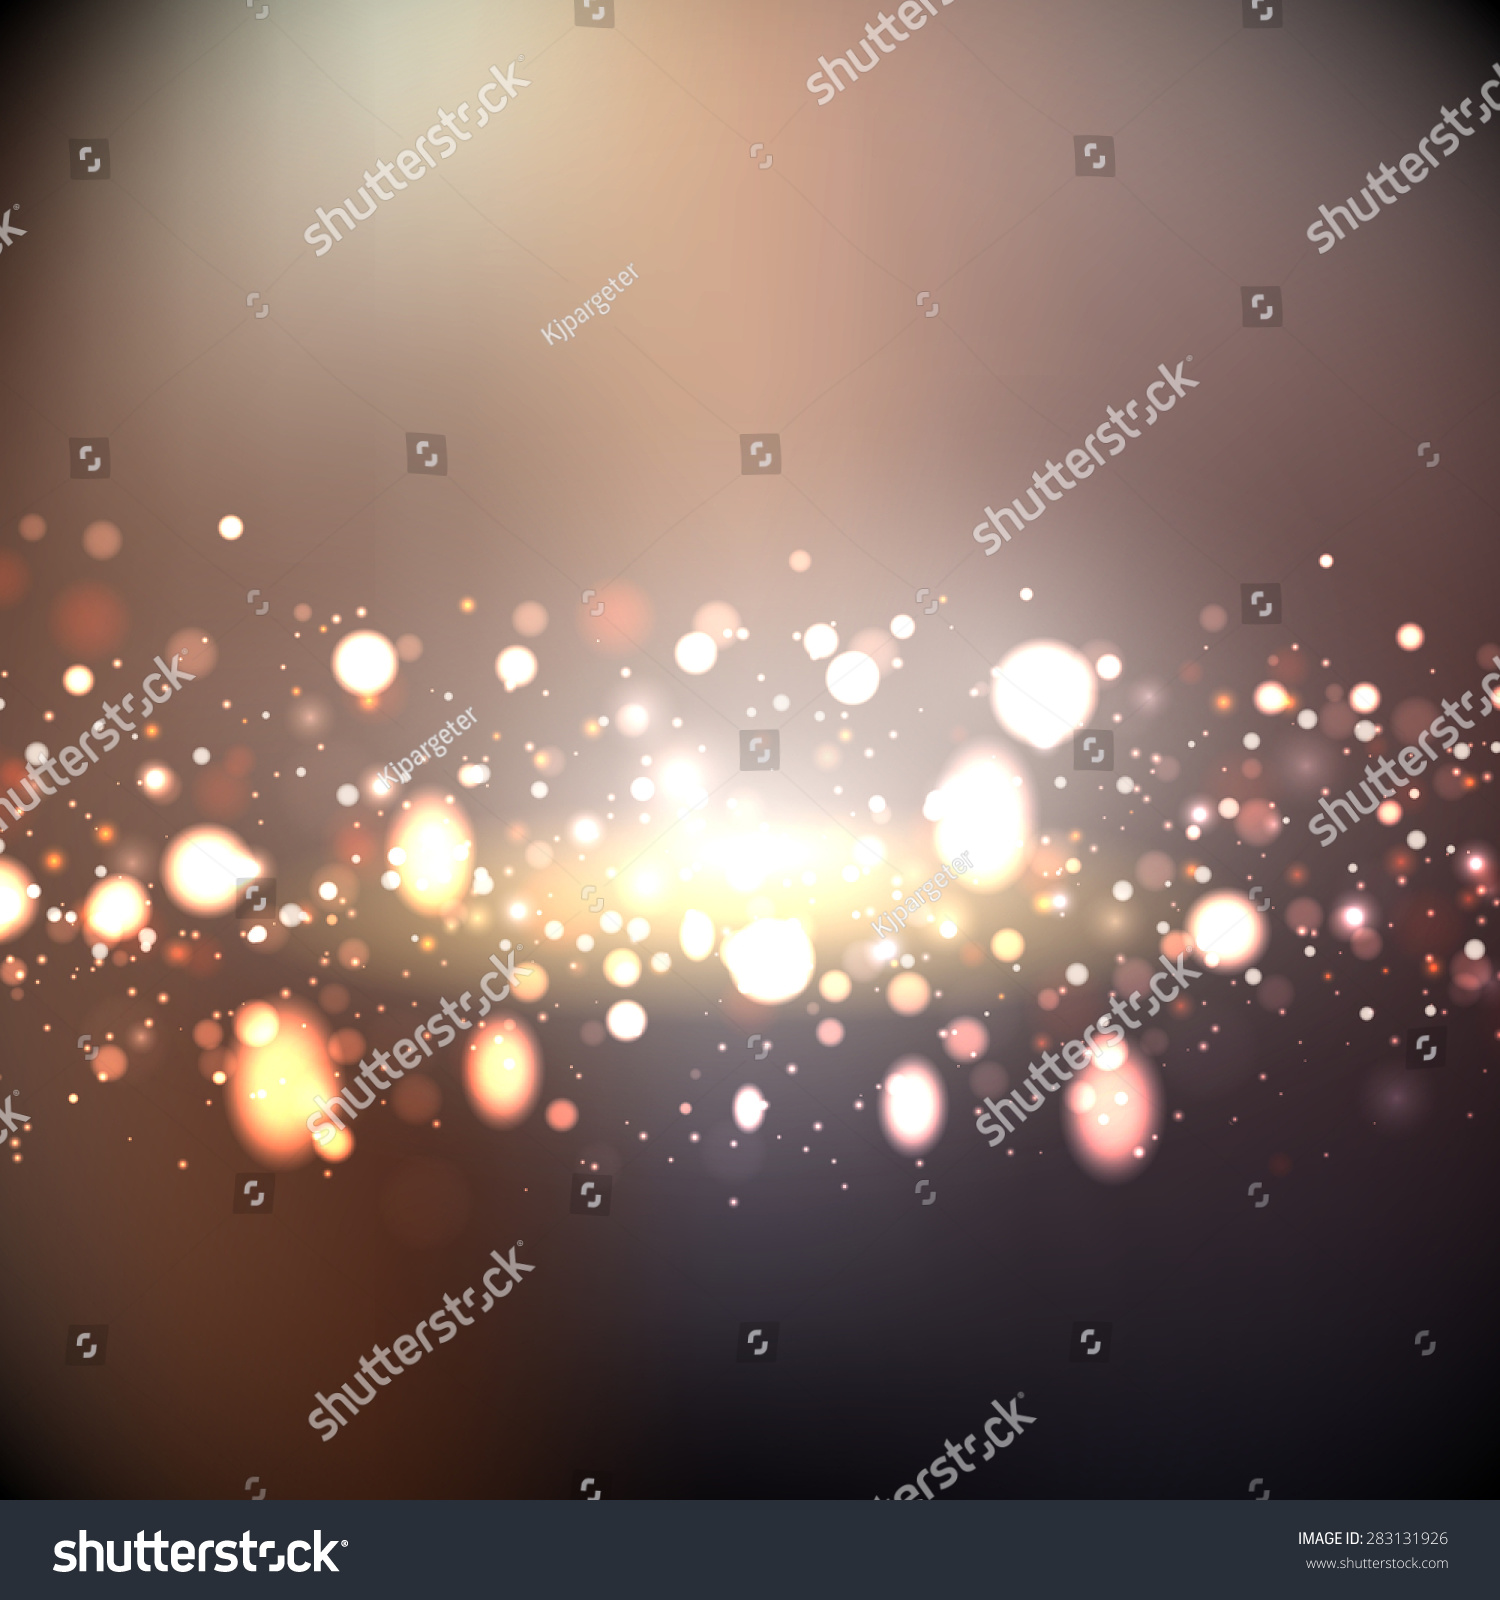 Decorative background with abstract lights design #283131926